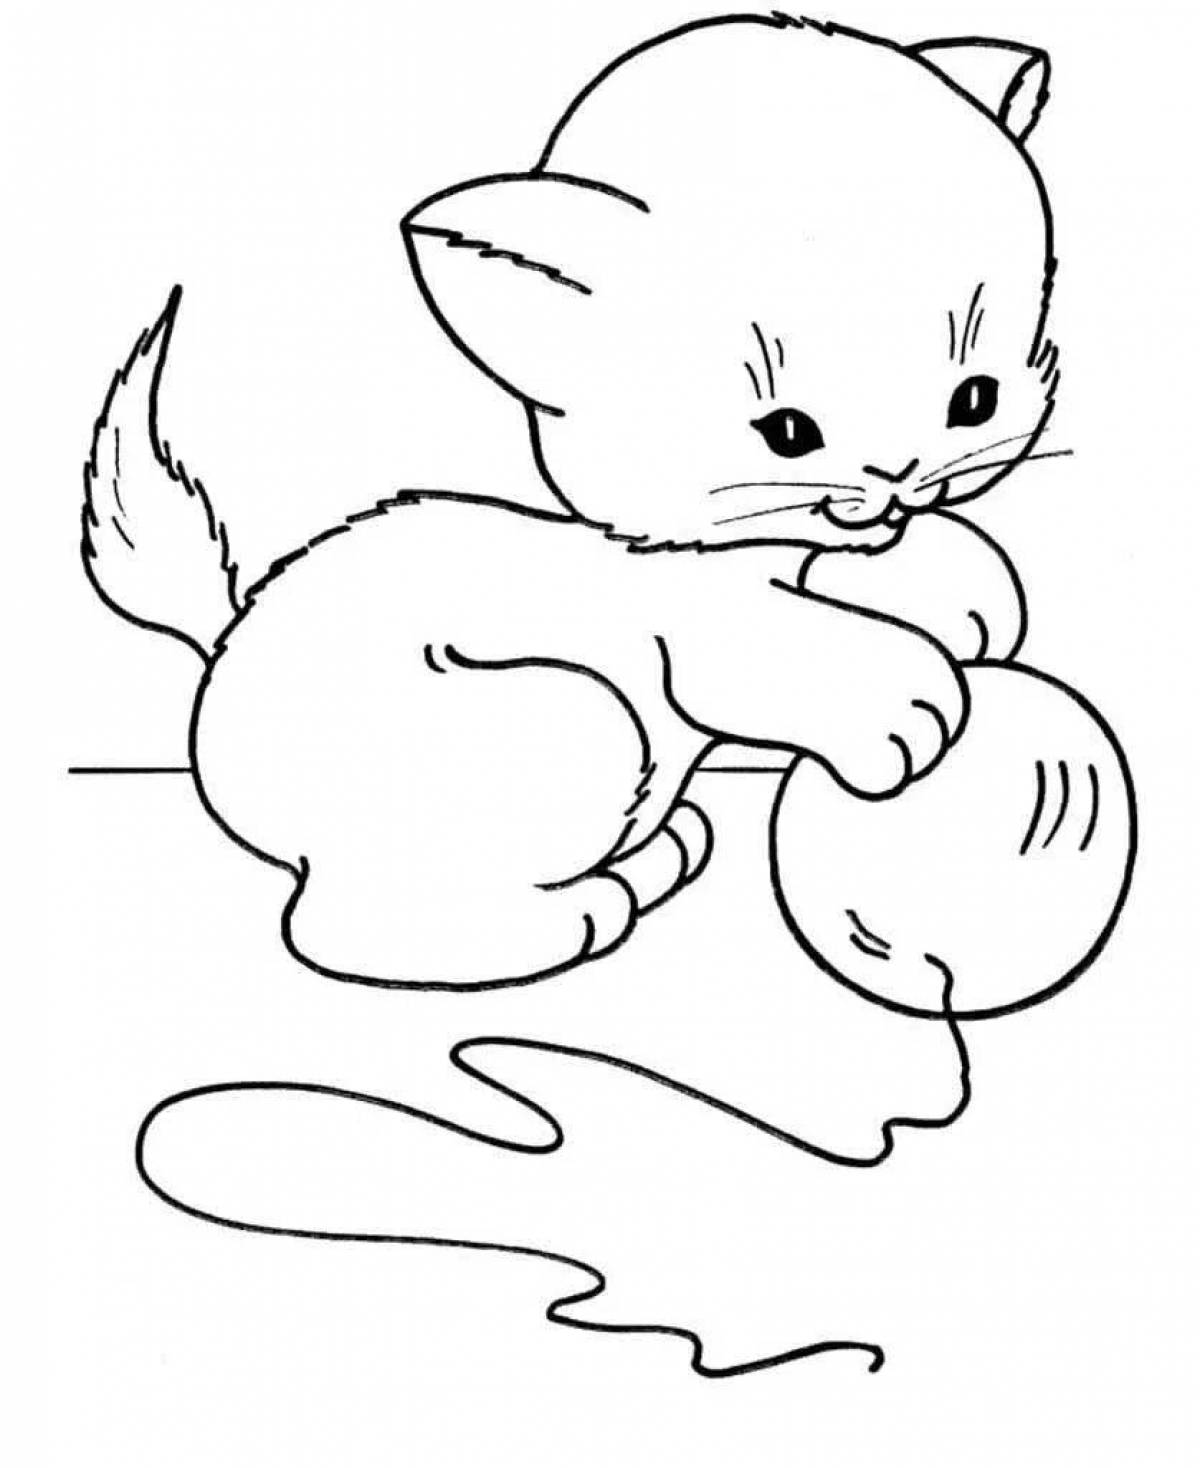 Coloring book fluffy little cat